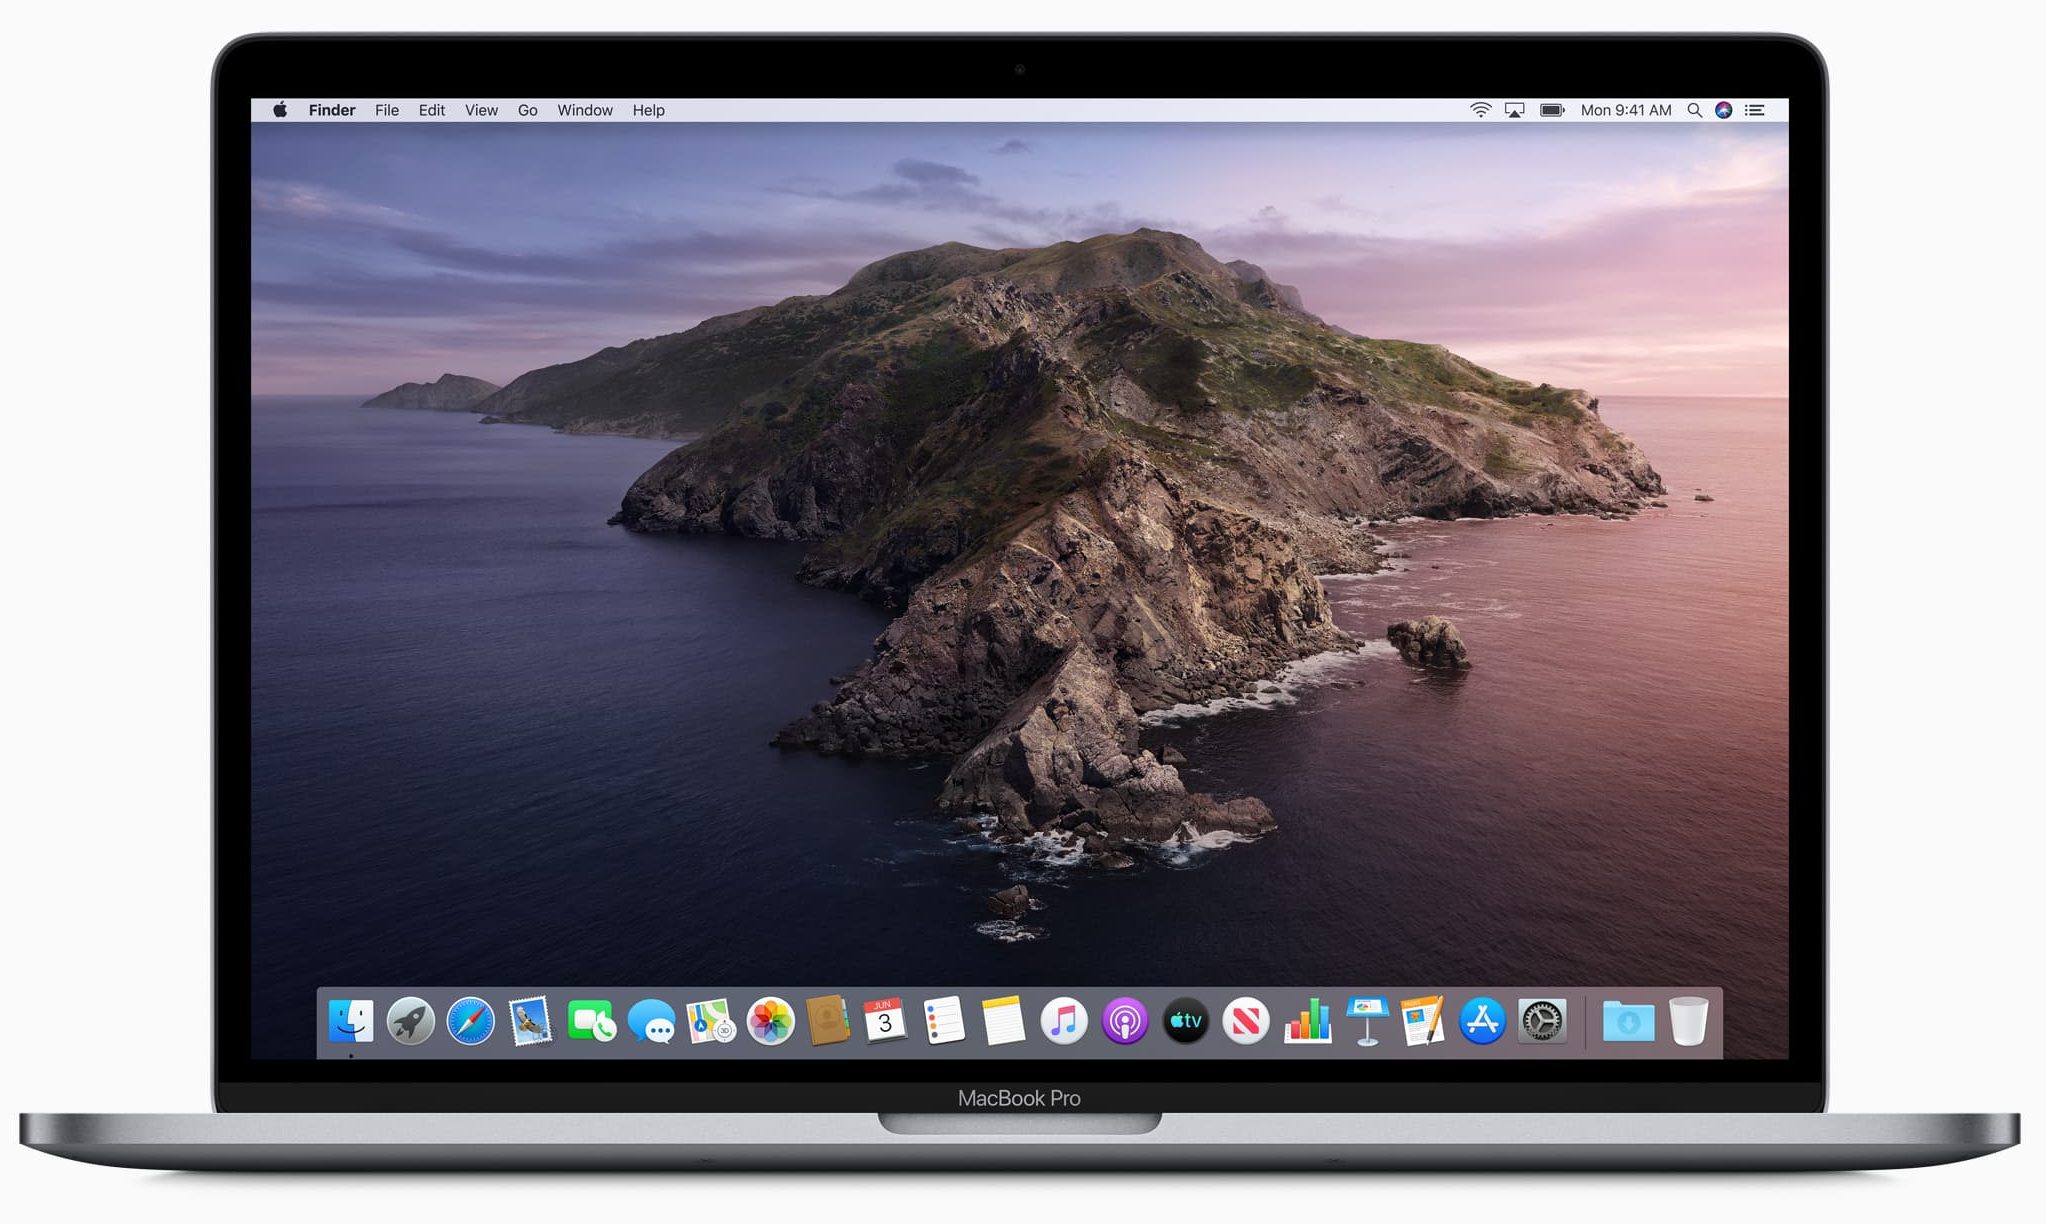 Macos Catalina Announced With New Apps Ipad As Secondary Display Feature Activation Lock And More